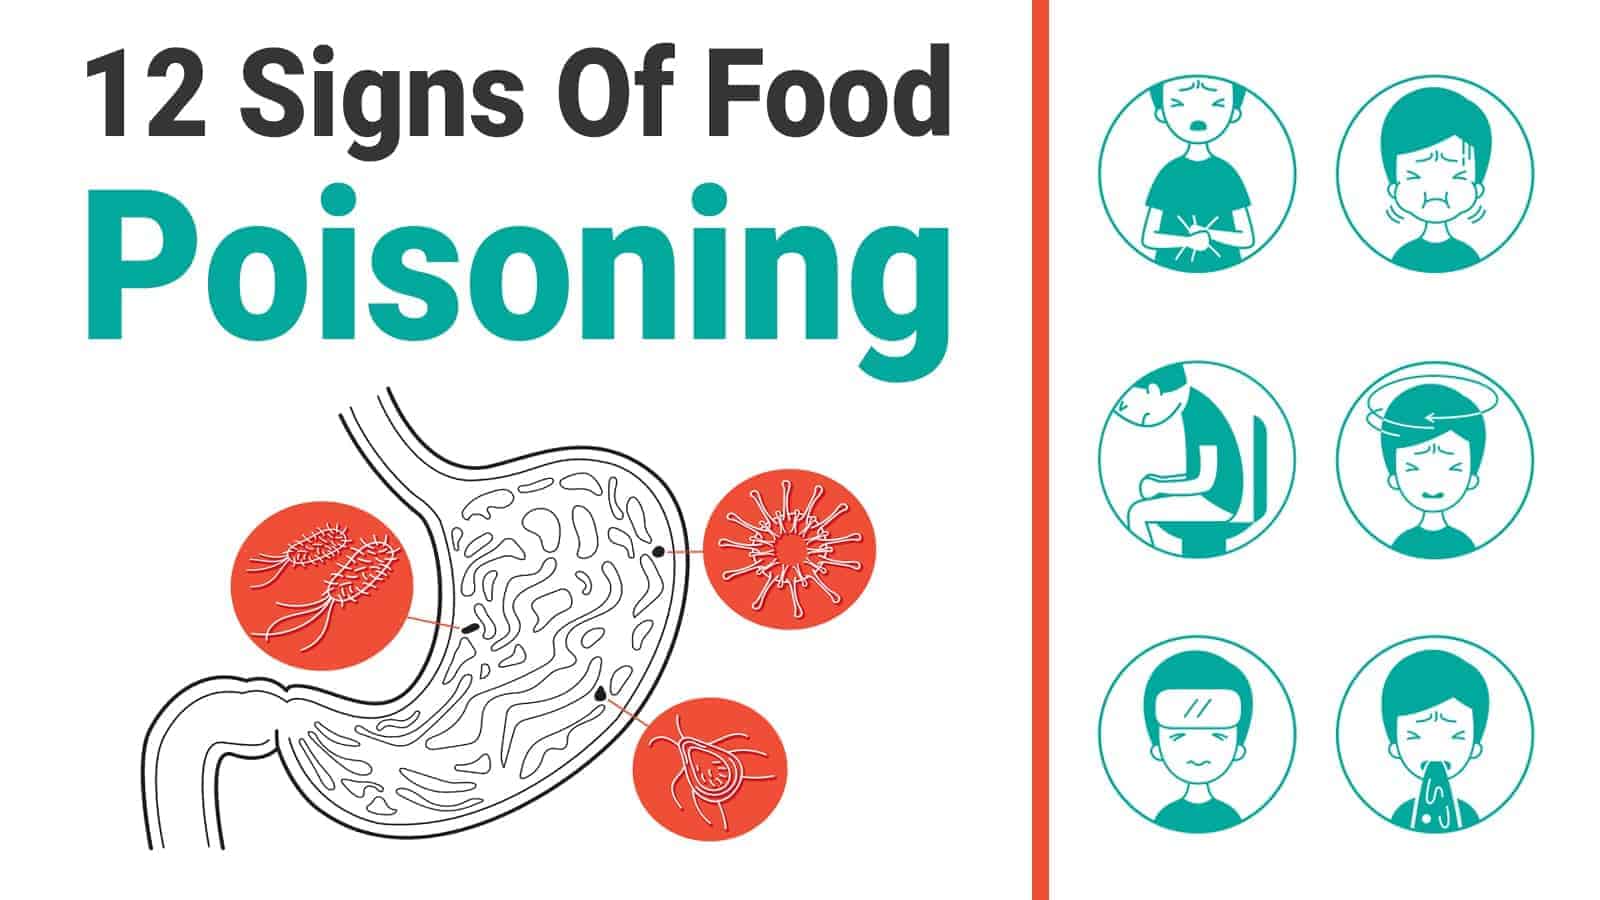 12 Signs Of Food Poisoning